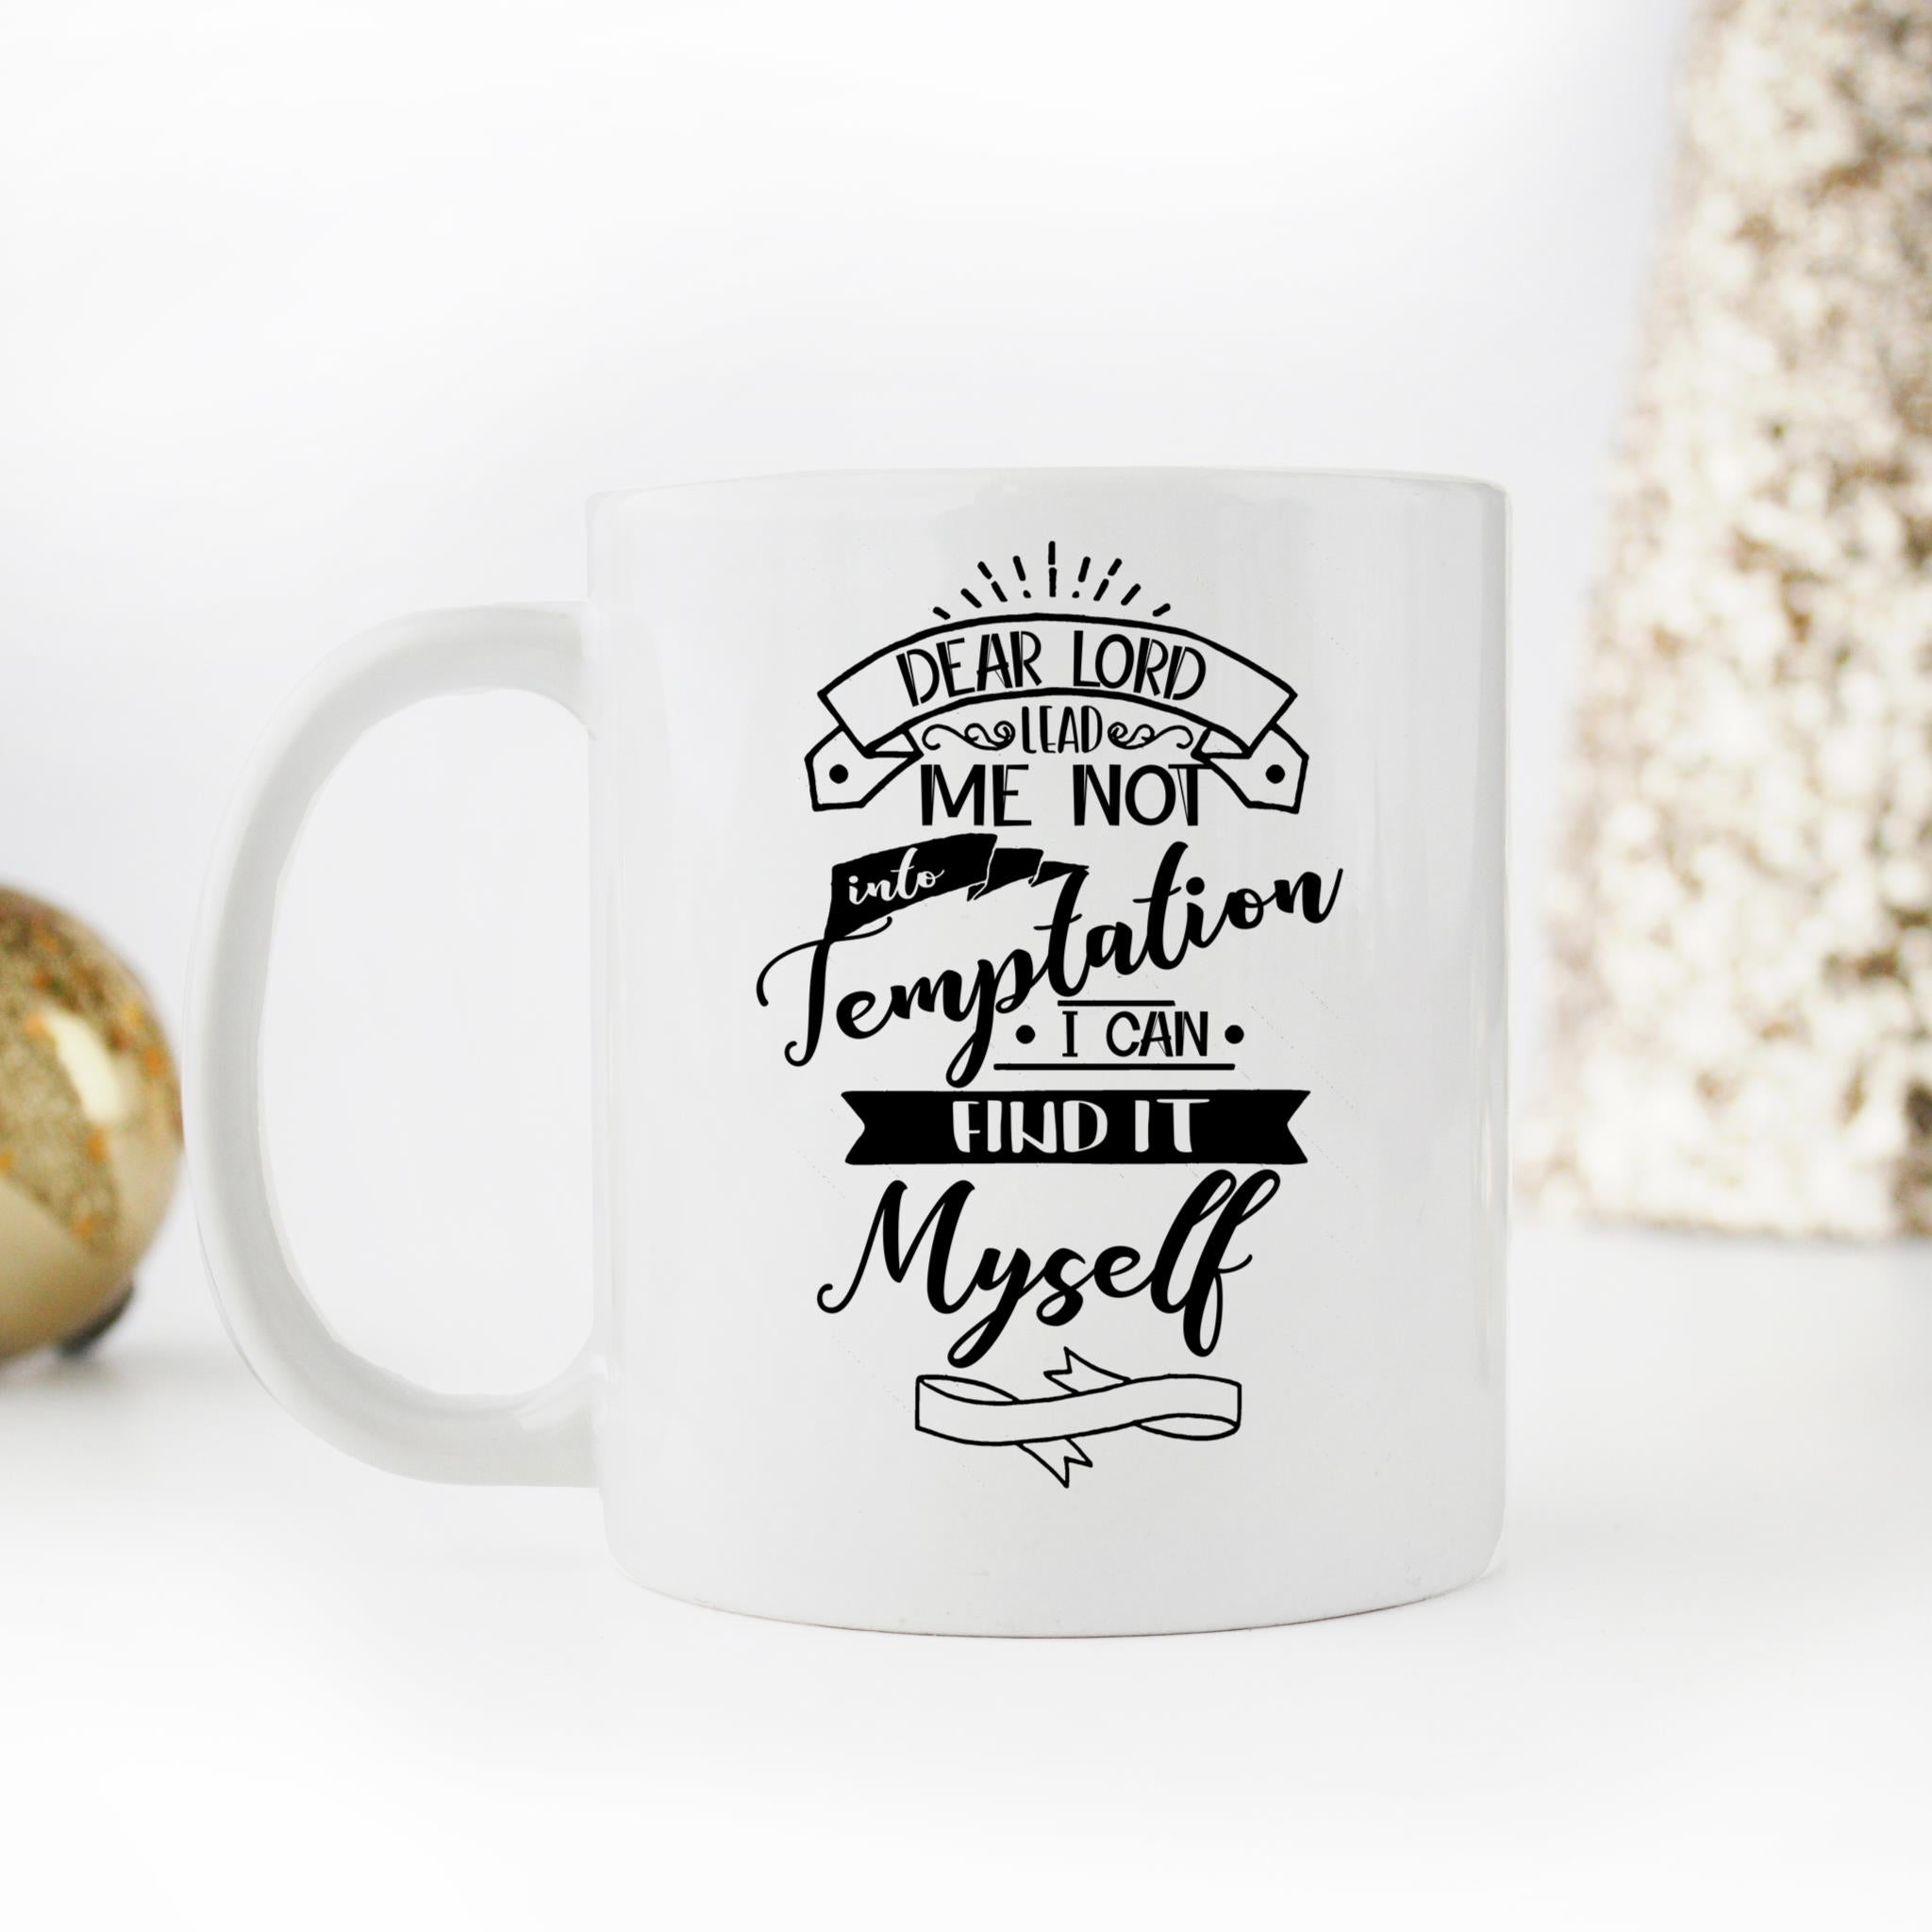 Skitongifts Coffee Mug Funny Ceramic Novelty Humorous Christian, Dear Lord Lead Me Not Into Temptation I Can Find It Myself UkCXaEl